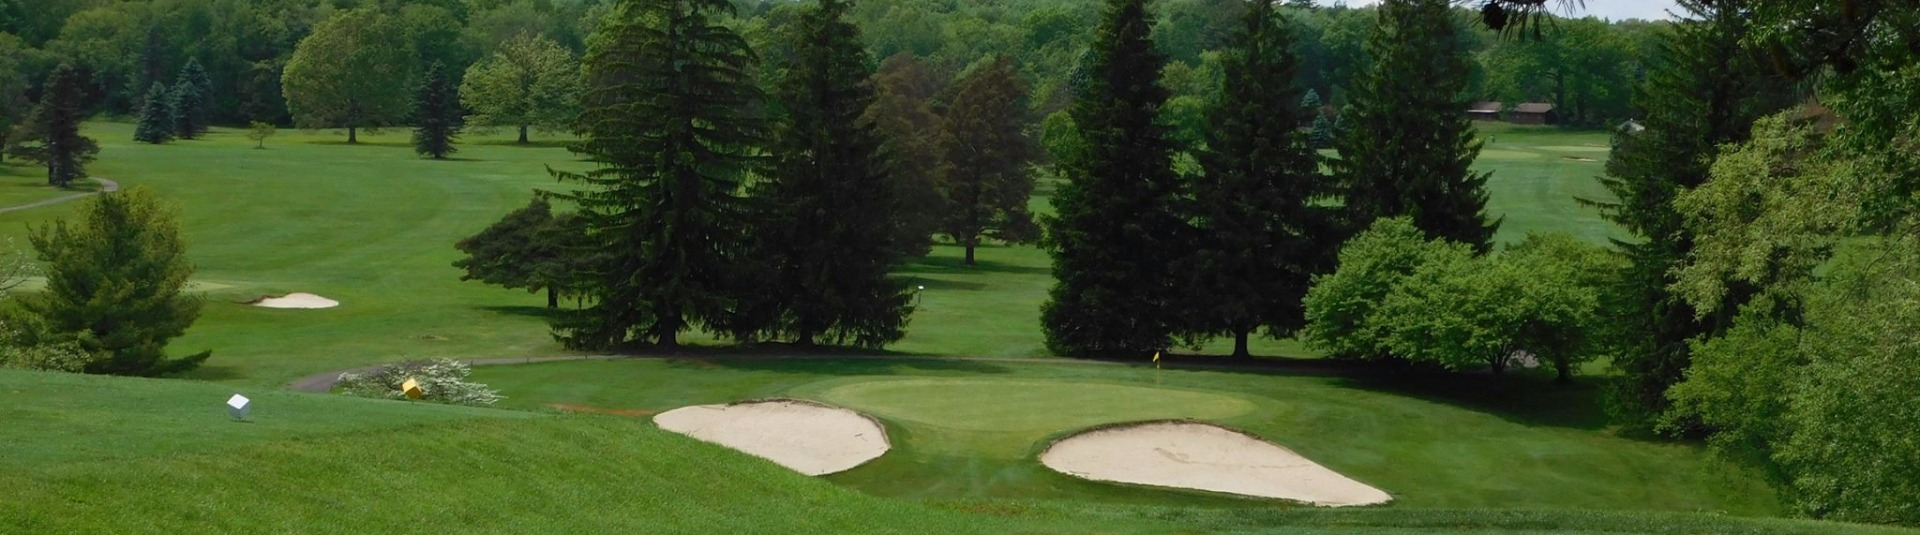 view of golf course green with sand traps